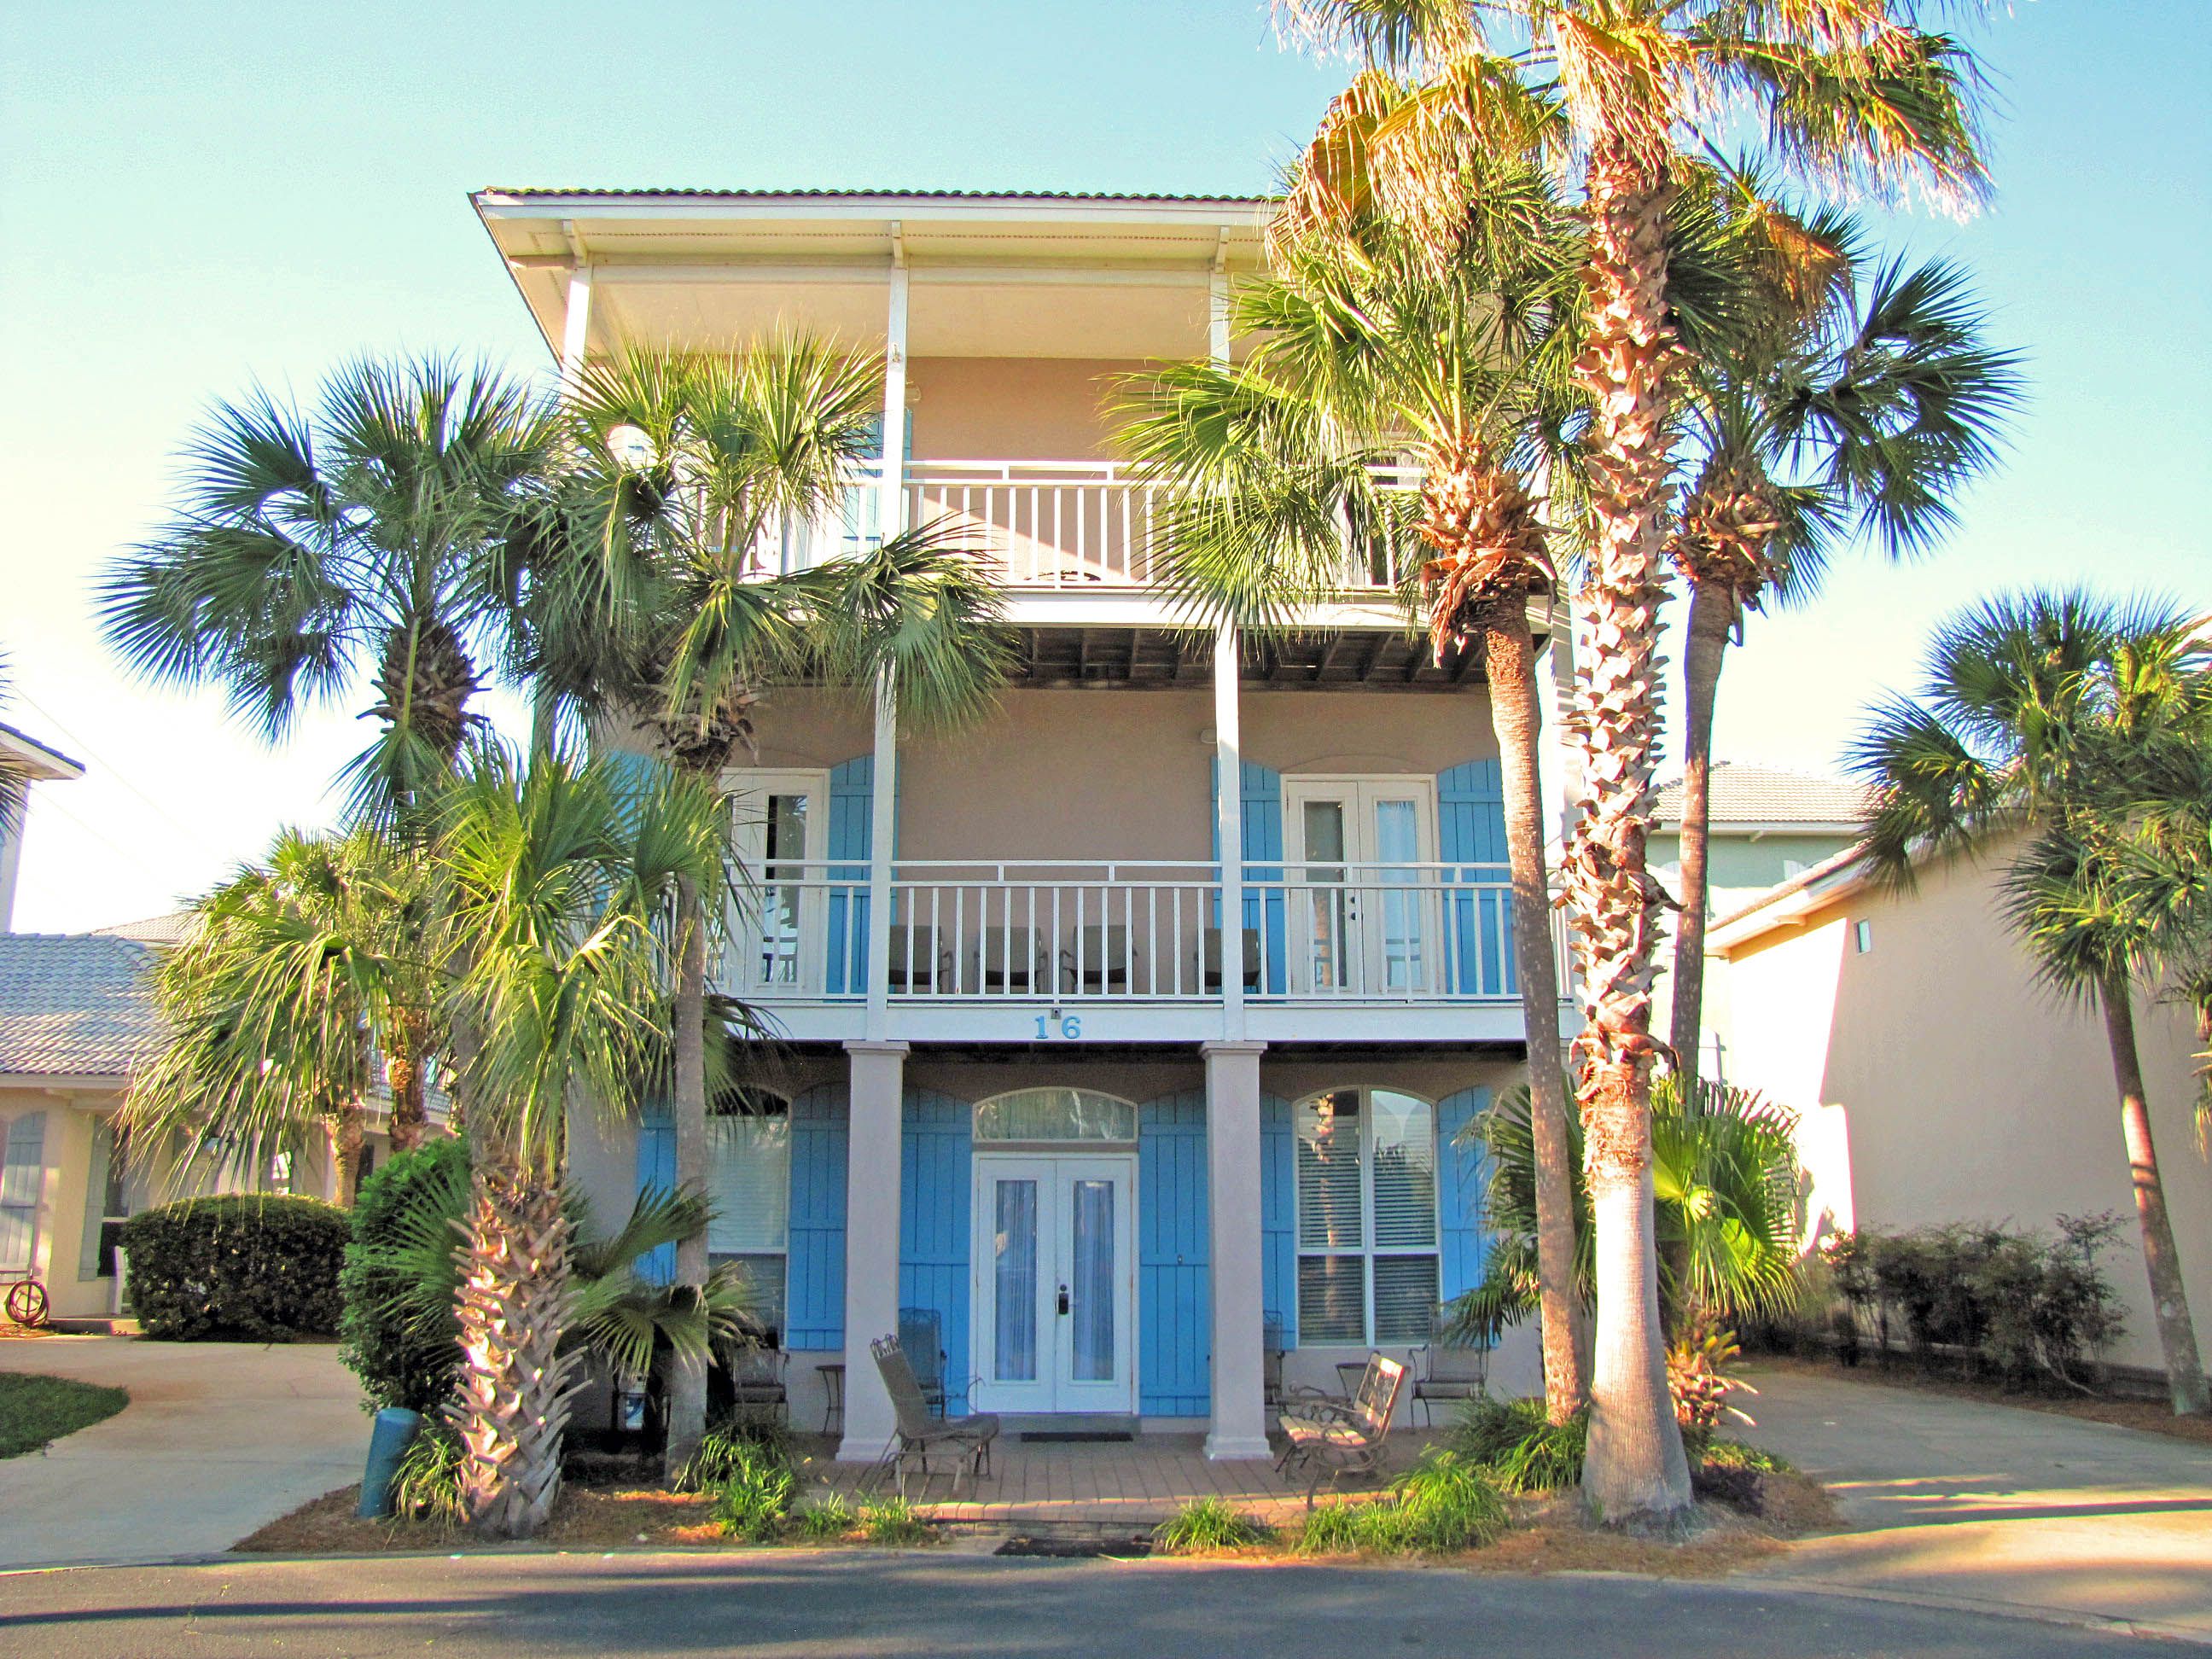 OCEAN DREAMS - 5BR/3BA Beach Cottage with a view of the bigger of 2 pools! 